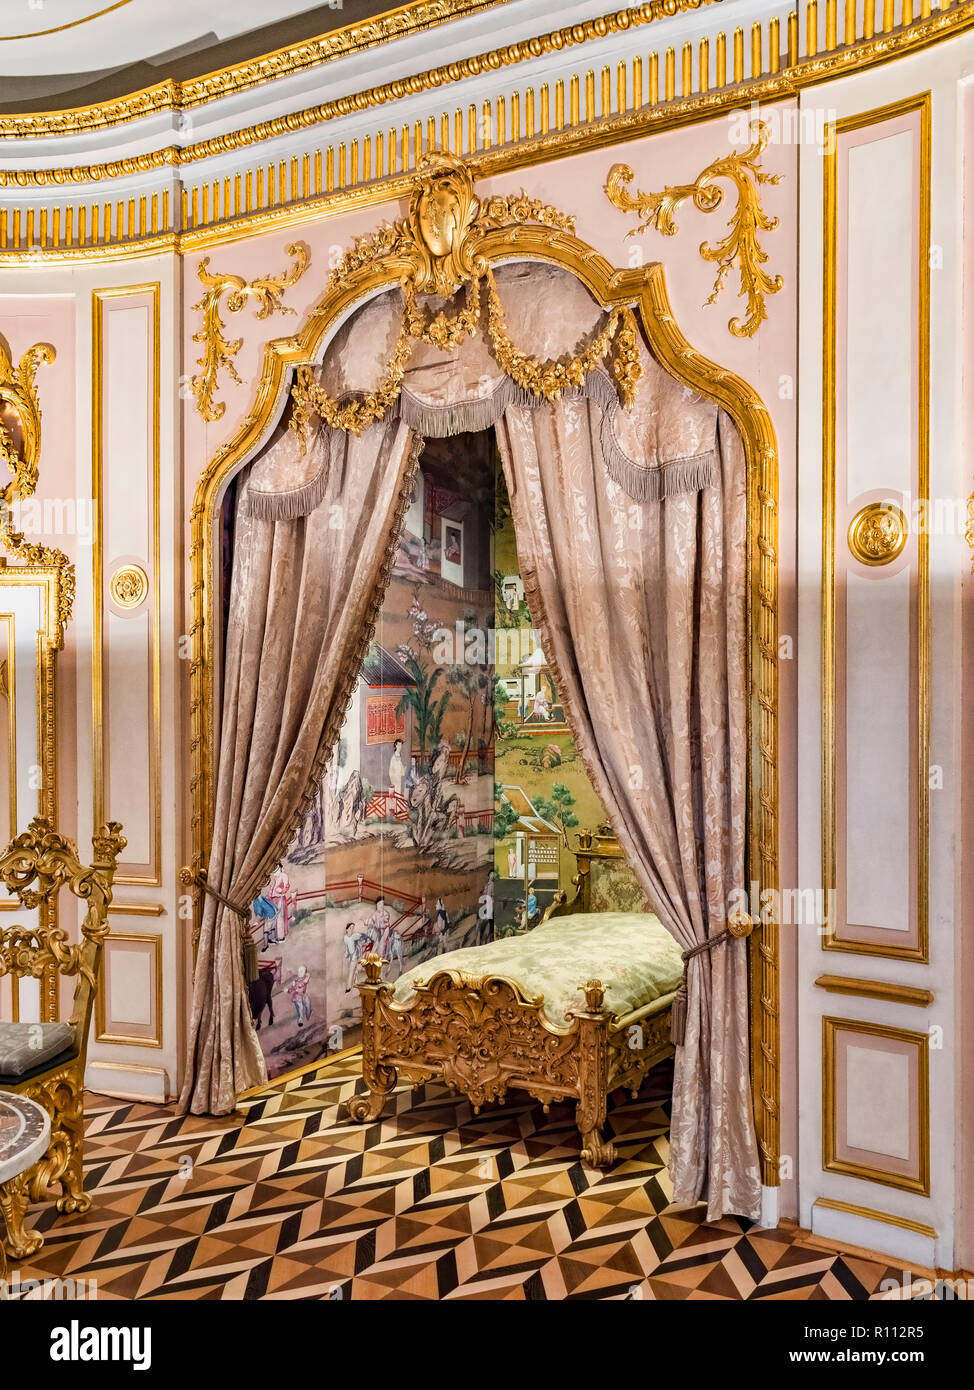 18 September 2018: St Petersburg, Russia - Bed in the State Bedroom or Crown Room in Peterhof Grand Palace. Stock Photo